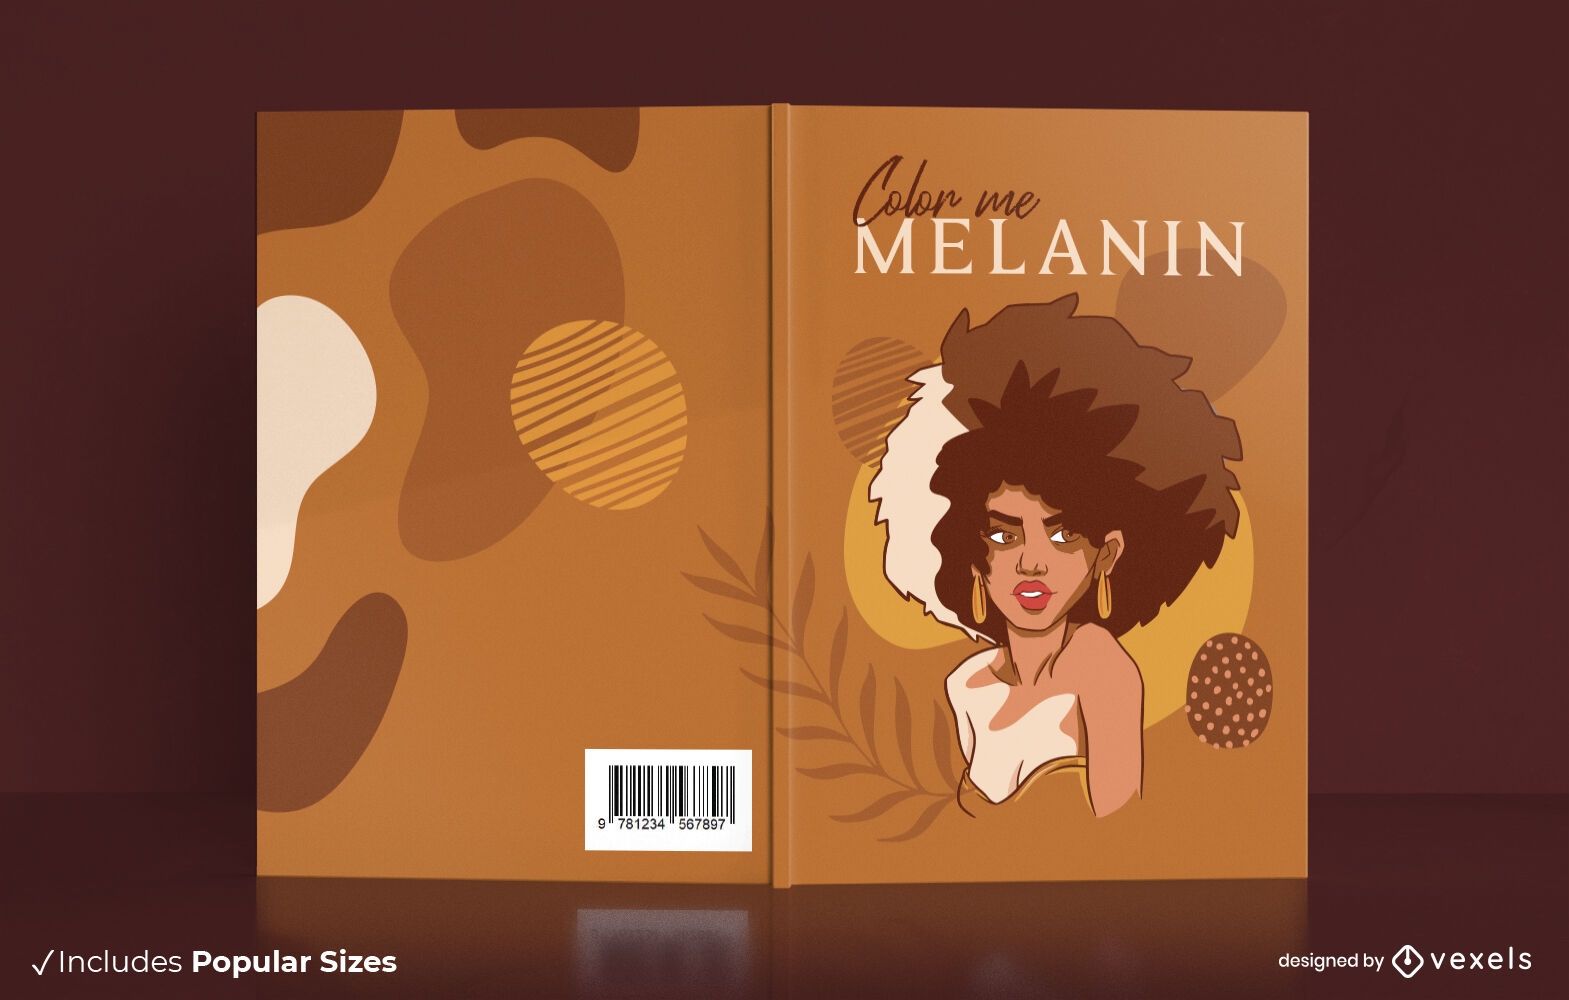 Black woman with afro book cover design